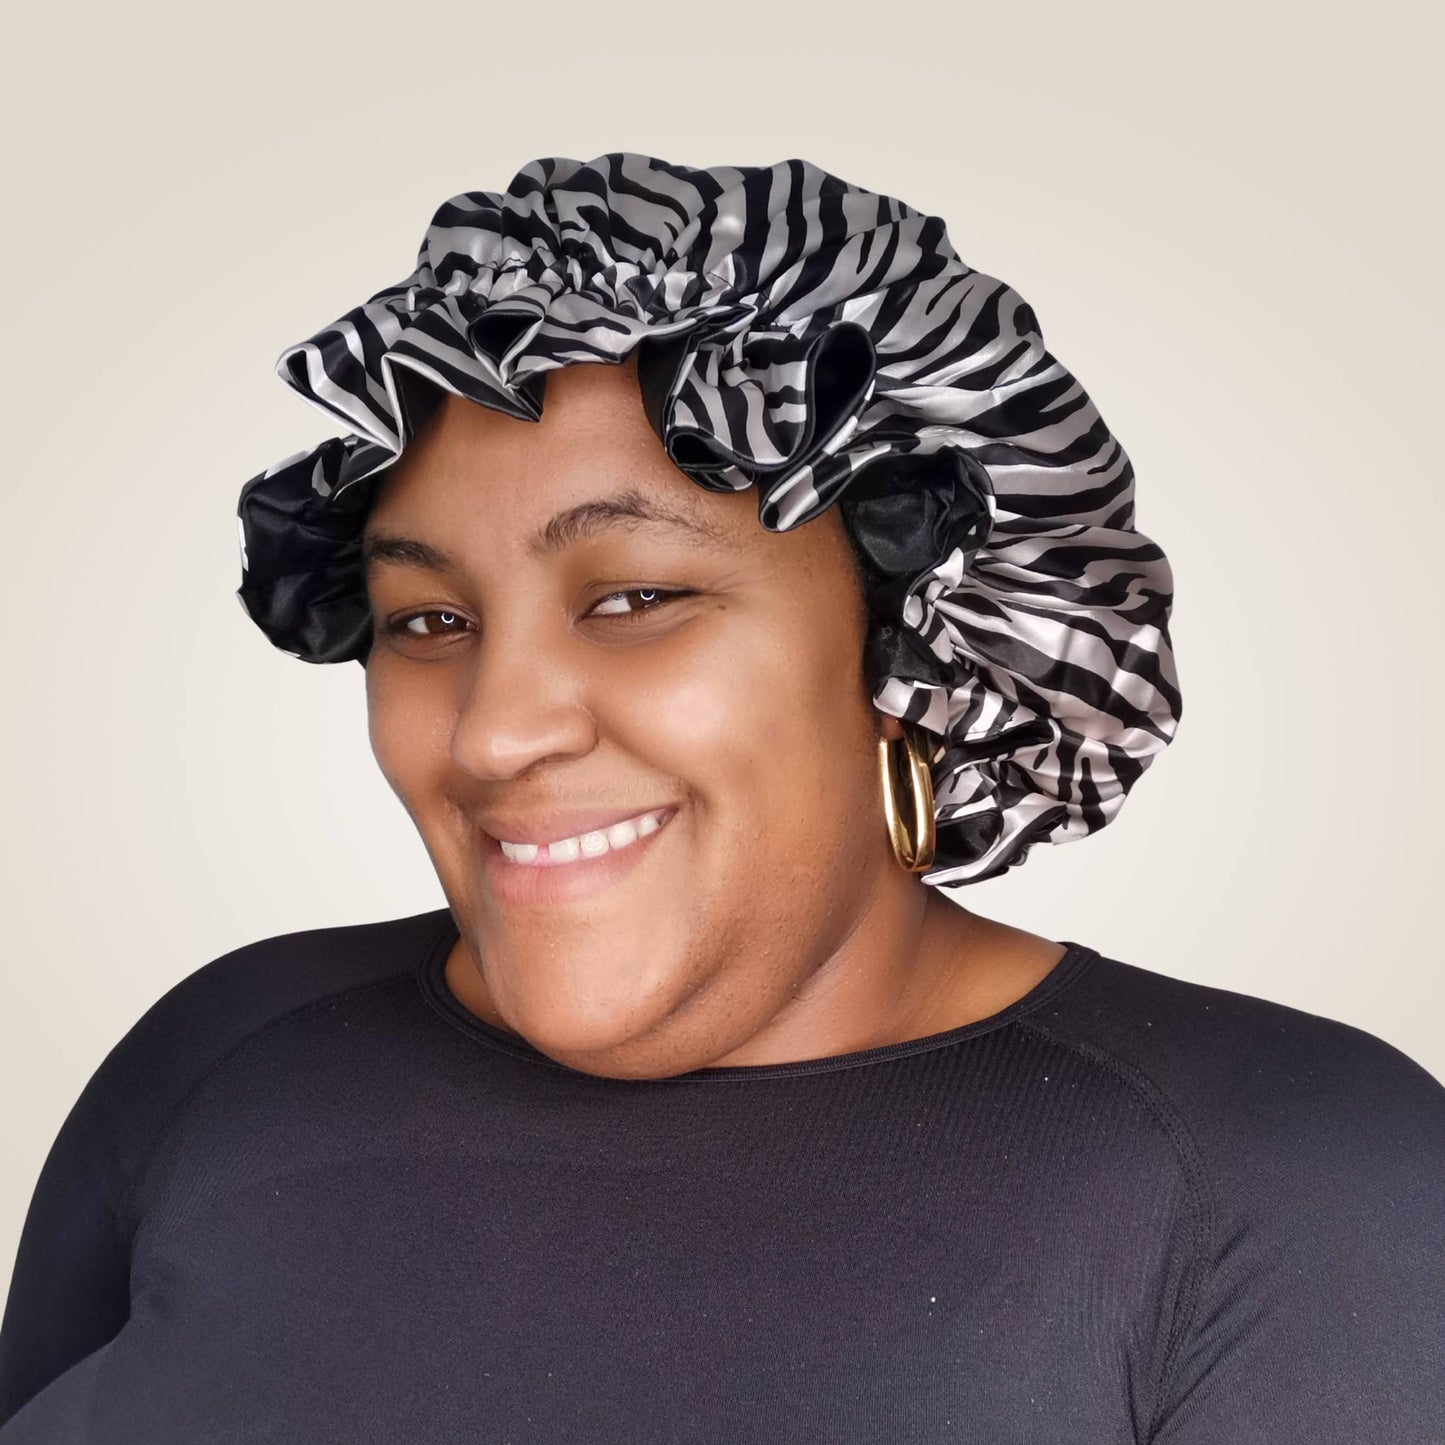 zebra print satin bonnet with frill finish and black lining - model view